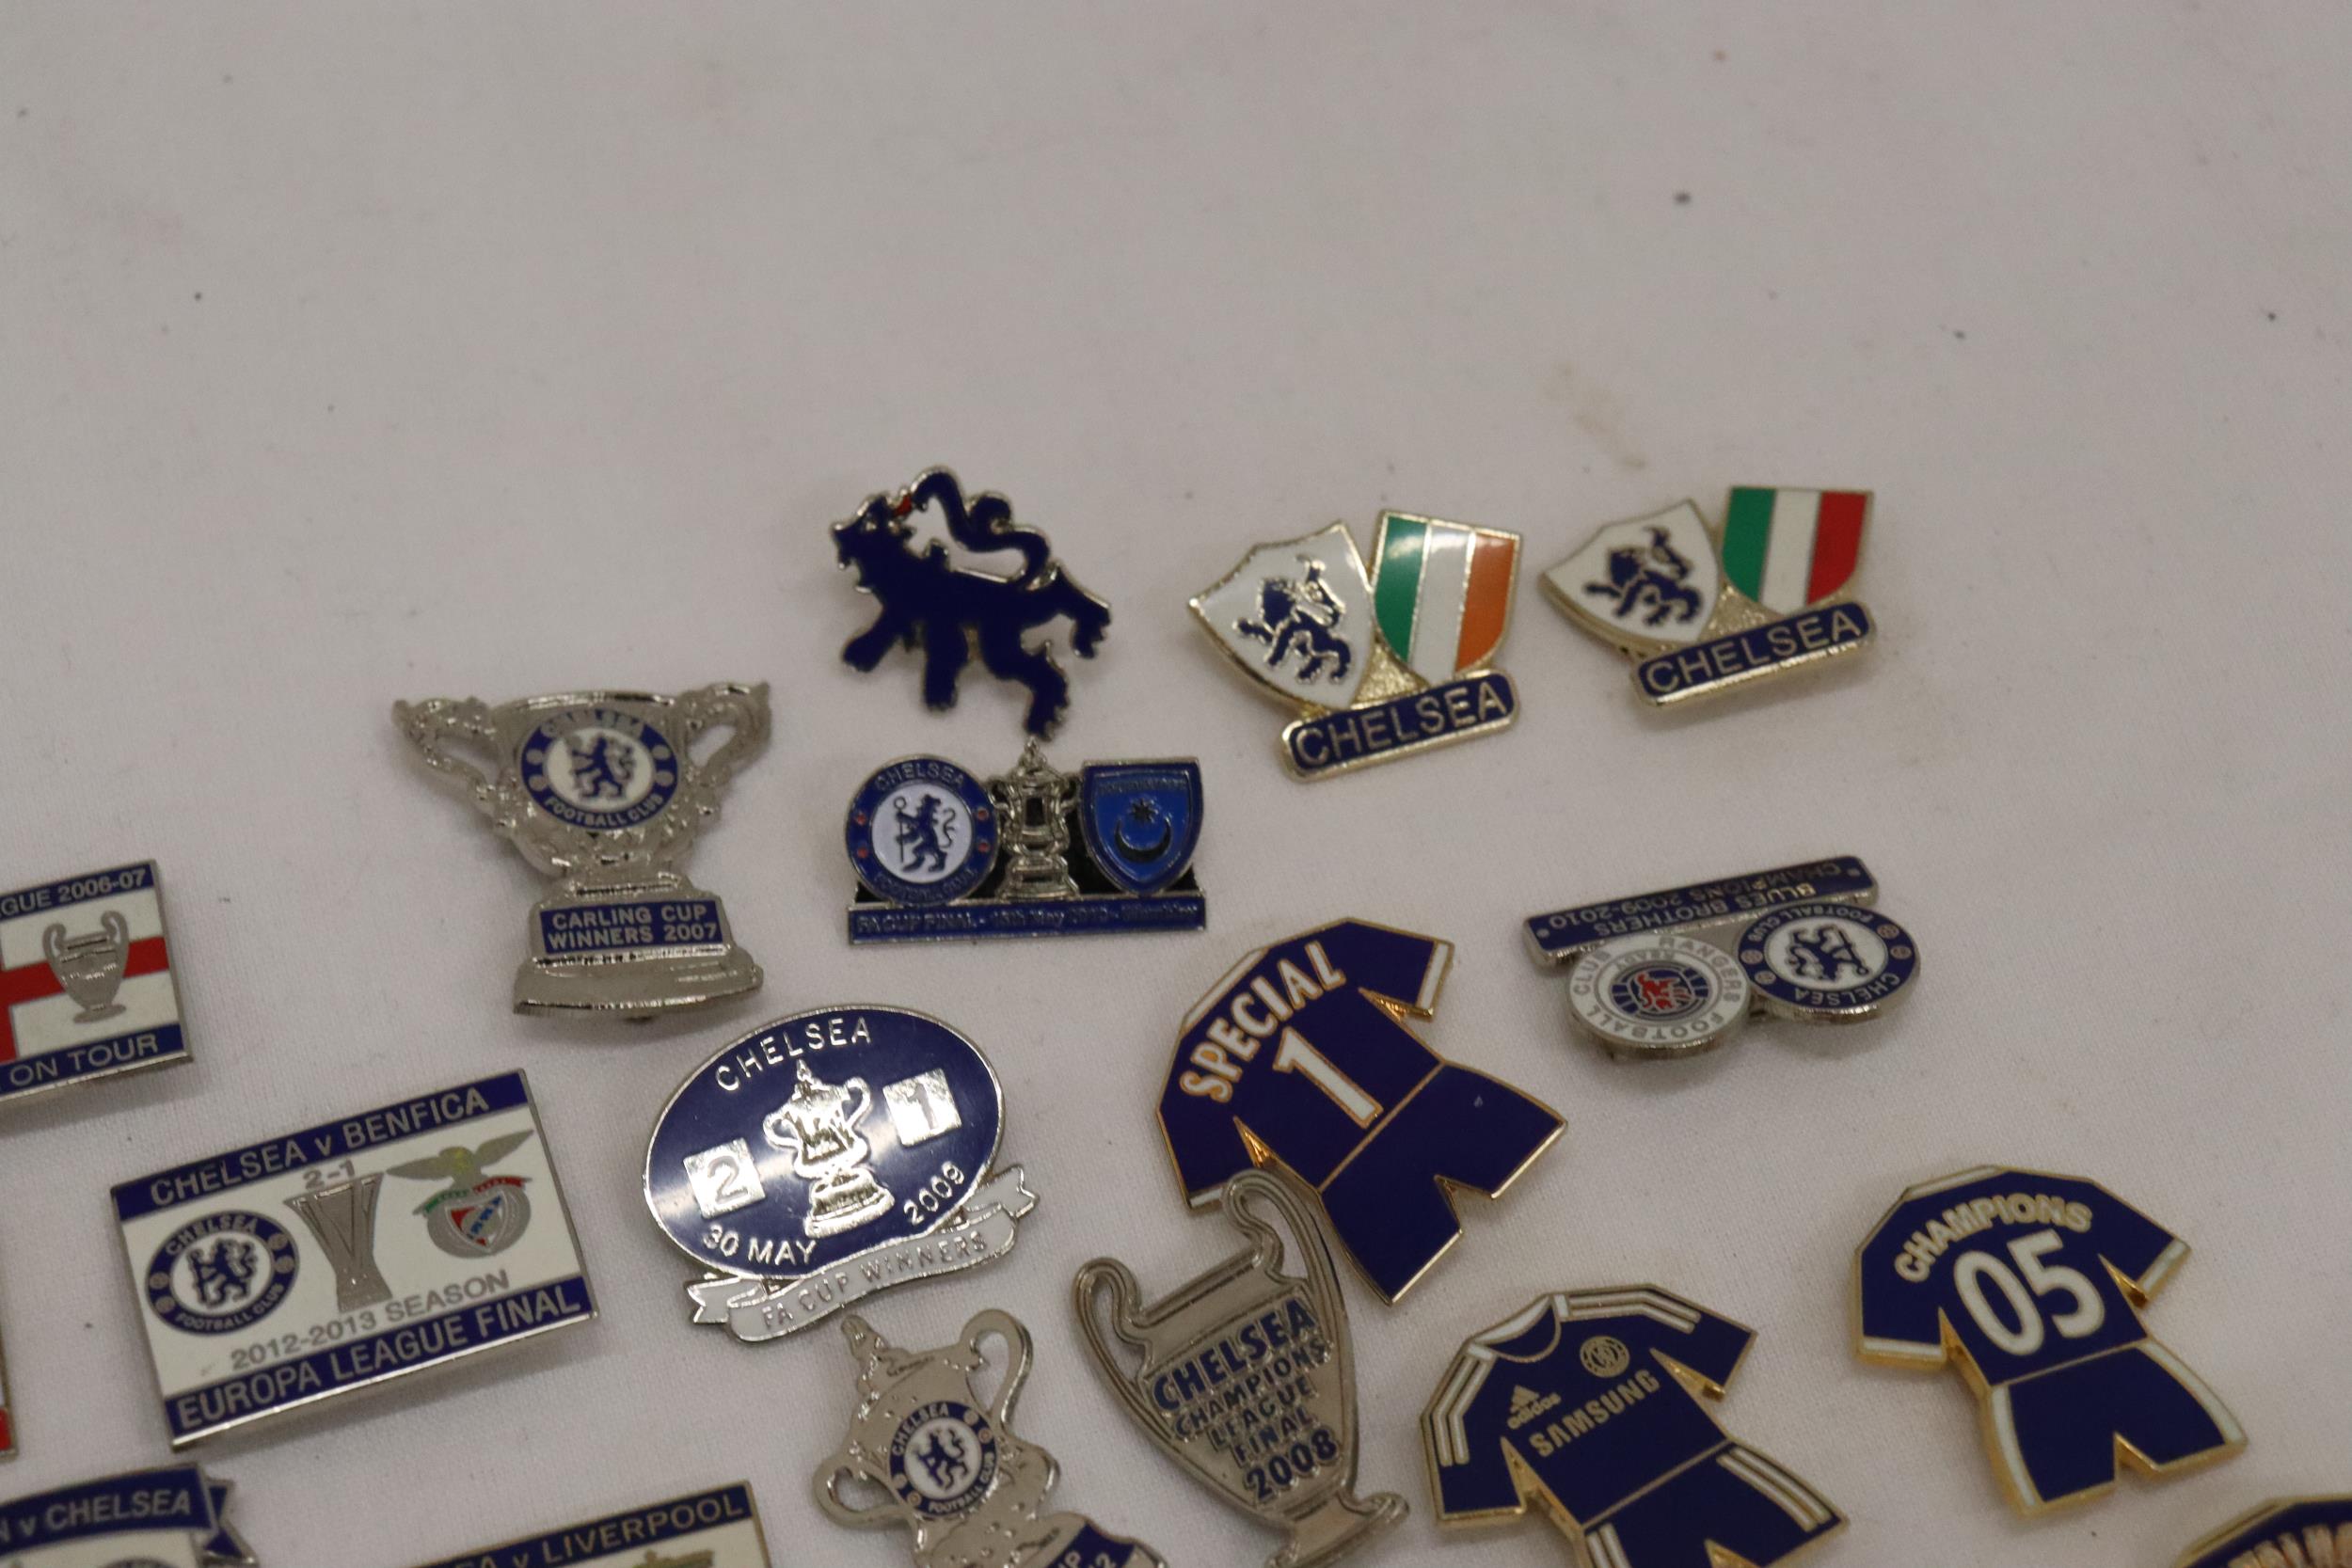 A COLLECTION OF ENAMEL CHELSEA FC BADGES - 23 IN TOTAL - Image 6 of 6